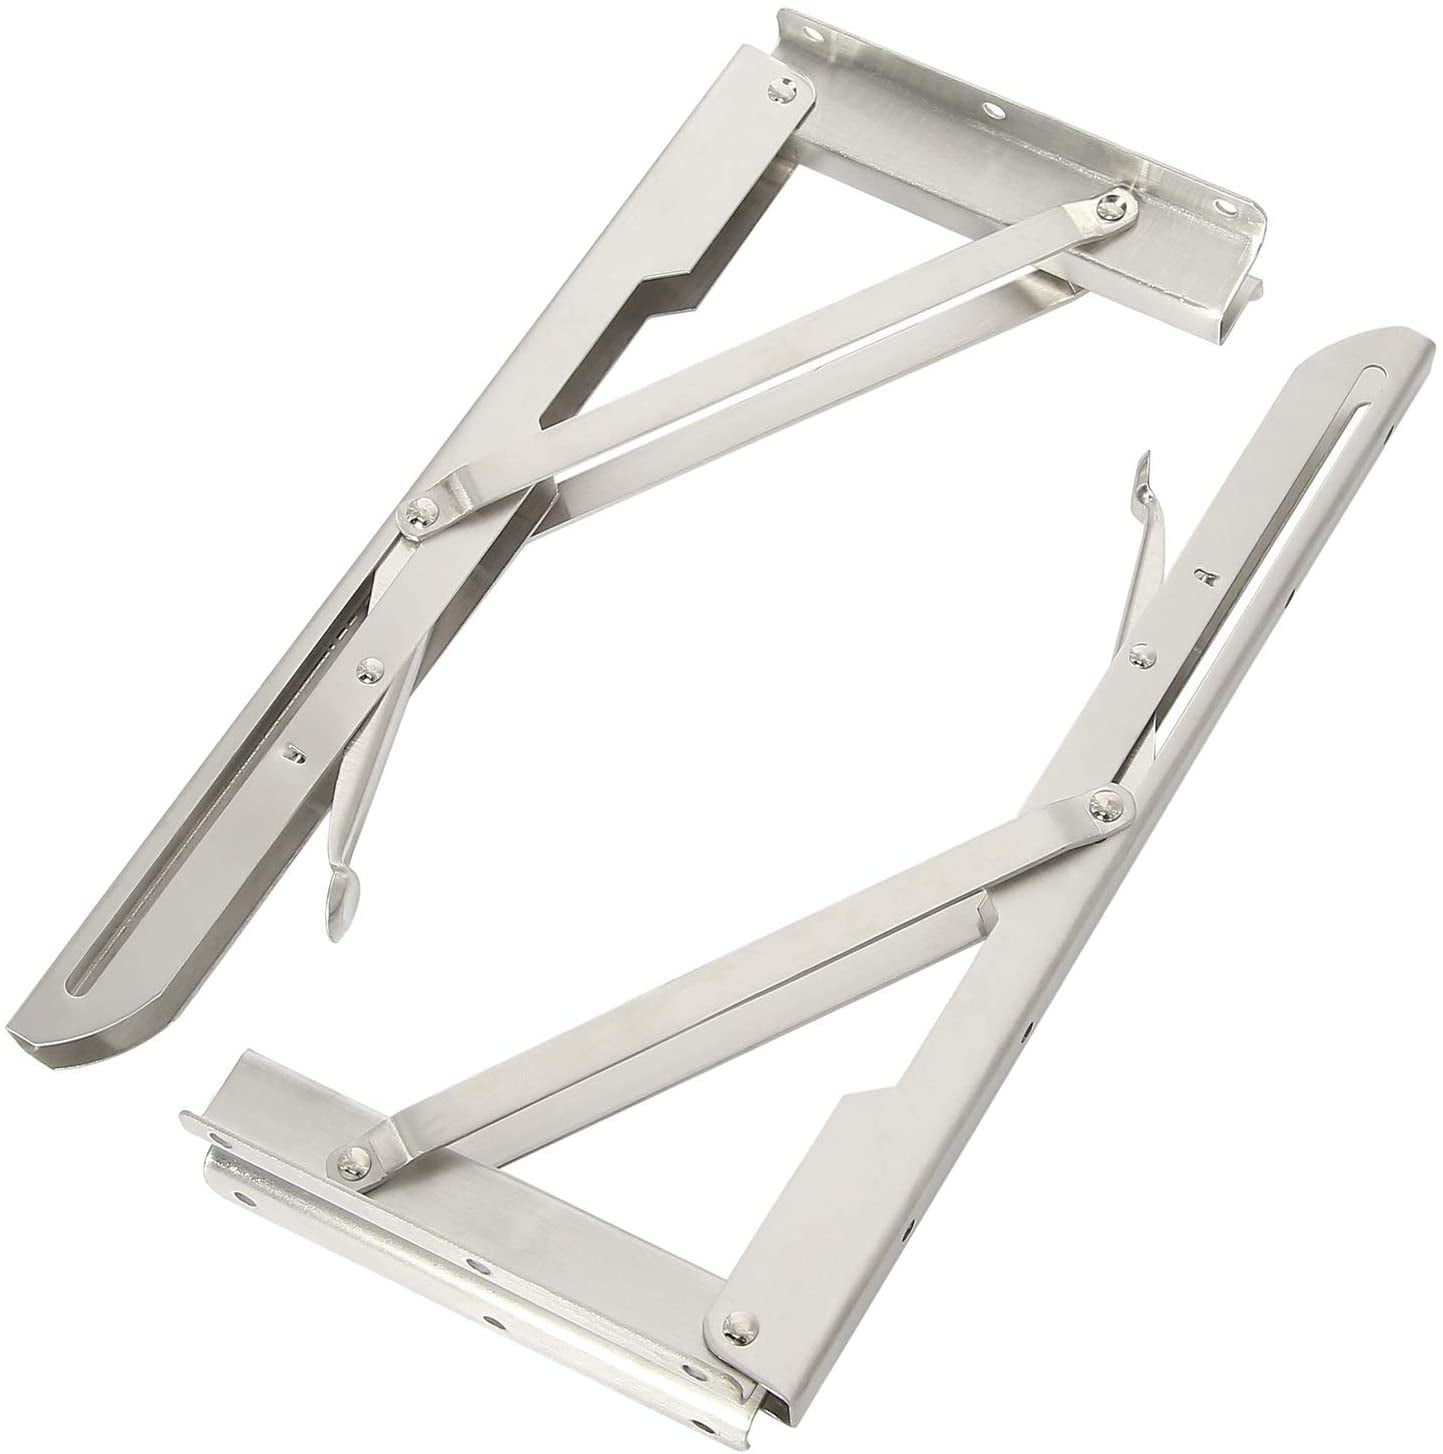 8"-18" RealPlus 4Pcs of Stainless Triangle Folding Bracket with Release Arm 